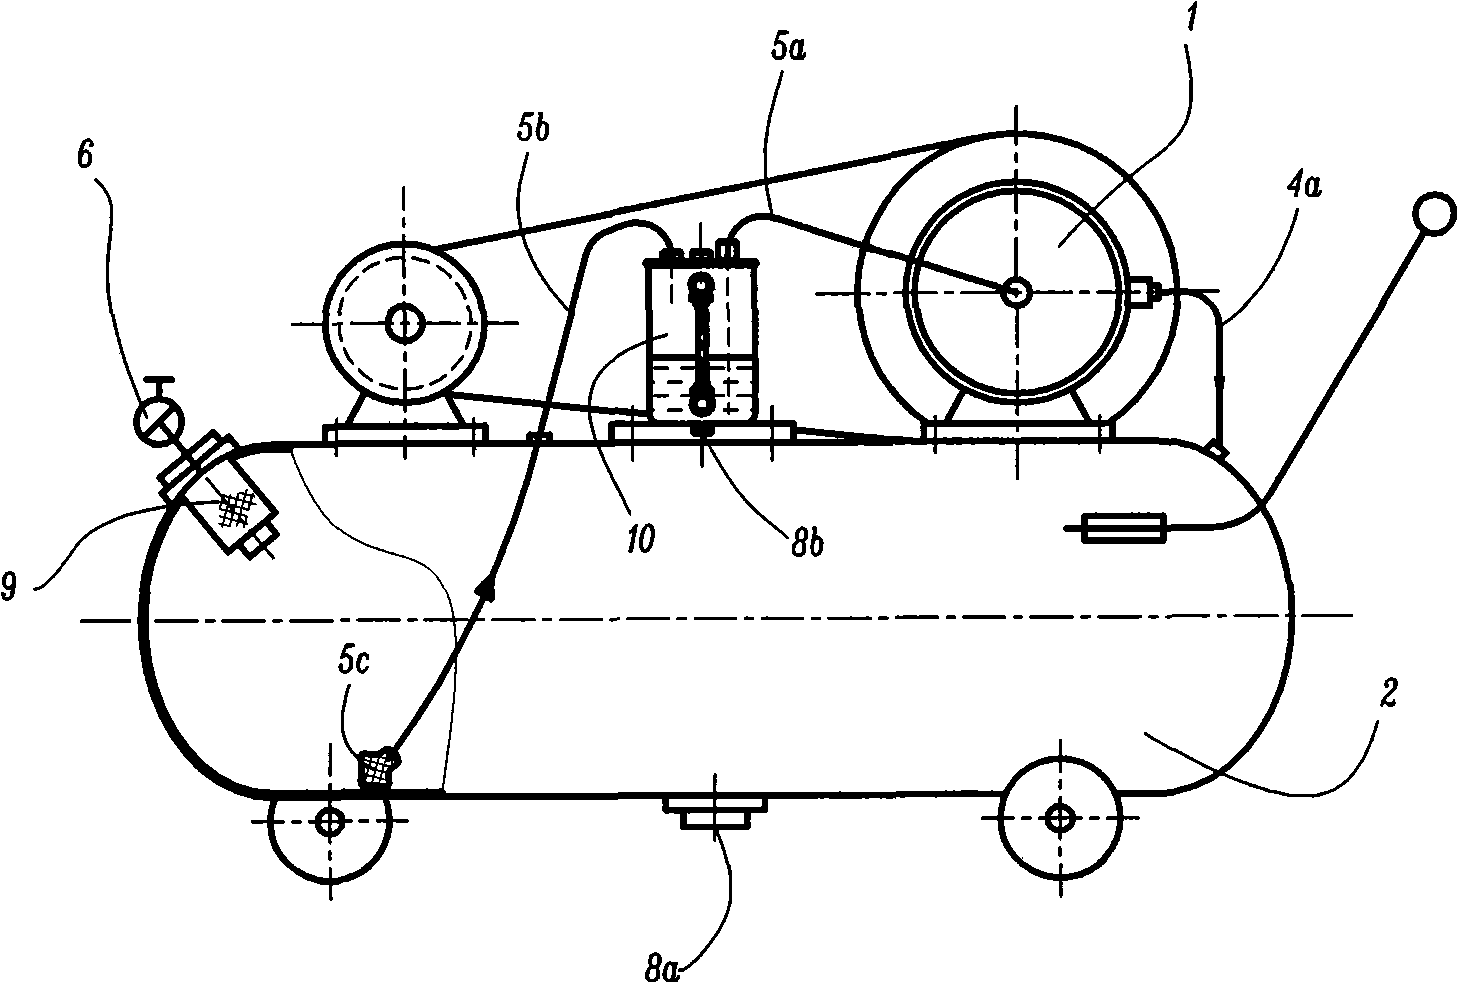 An engine oil circulation and drainage device of an air compressor